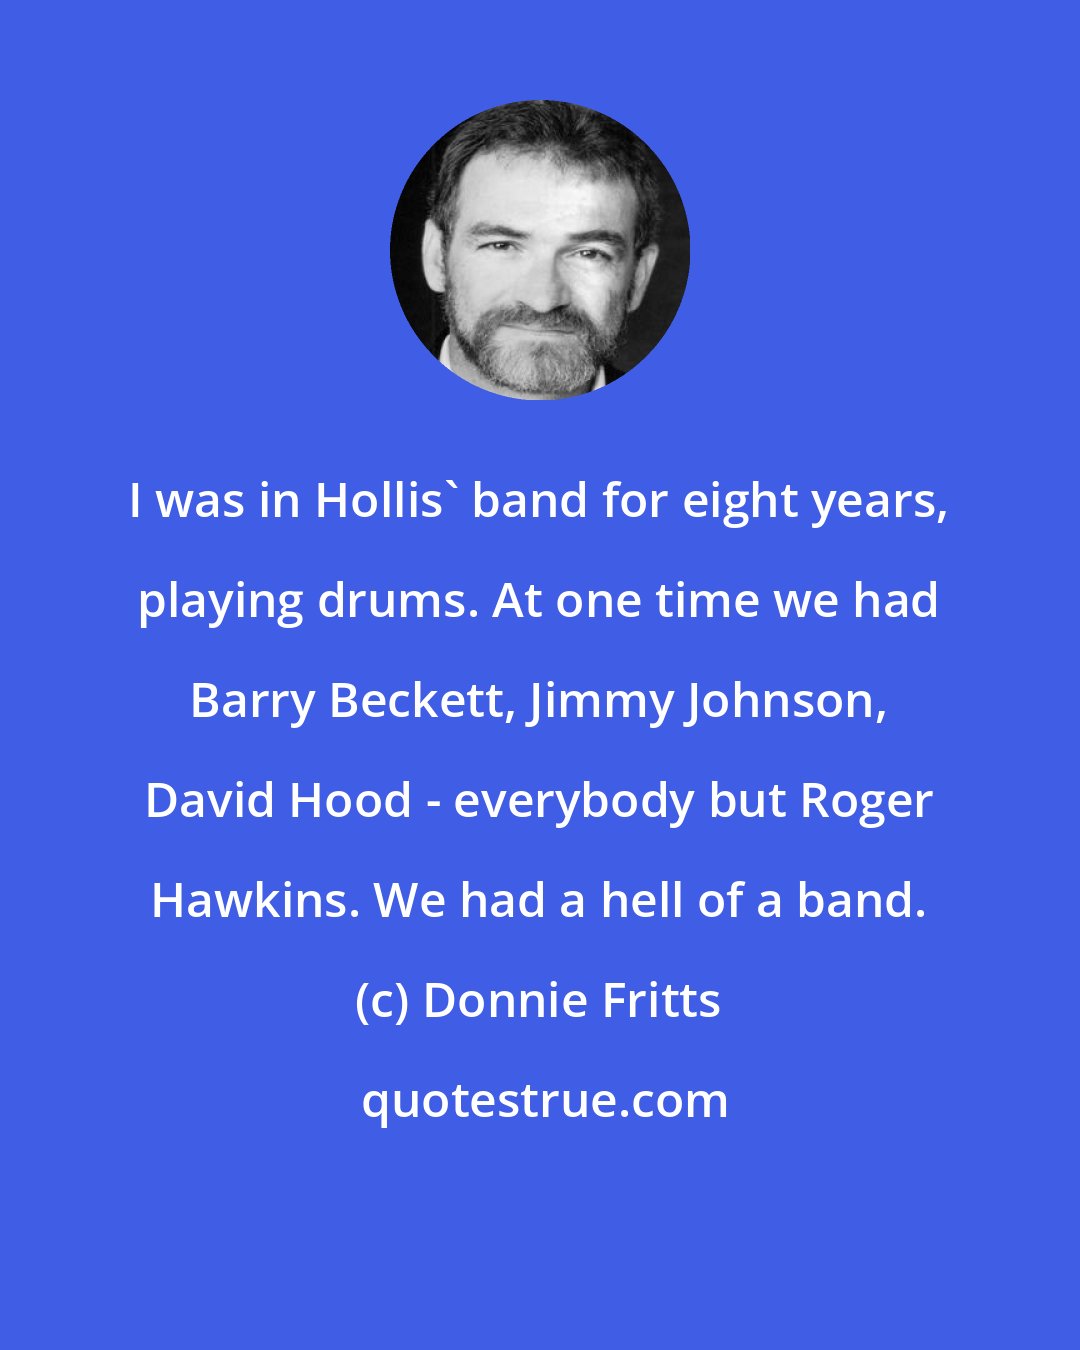 Donnie Fritts: I was in Hollis' band for eight years, playing drums. At one time we had Barry Beckett, Jimmy Johnson, David Hood - everybody but Roger Hawkins. We had a hell of a band.